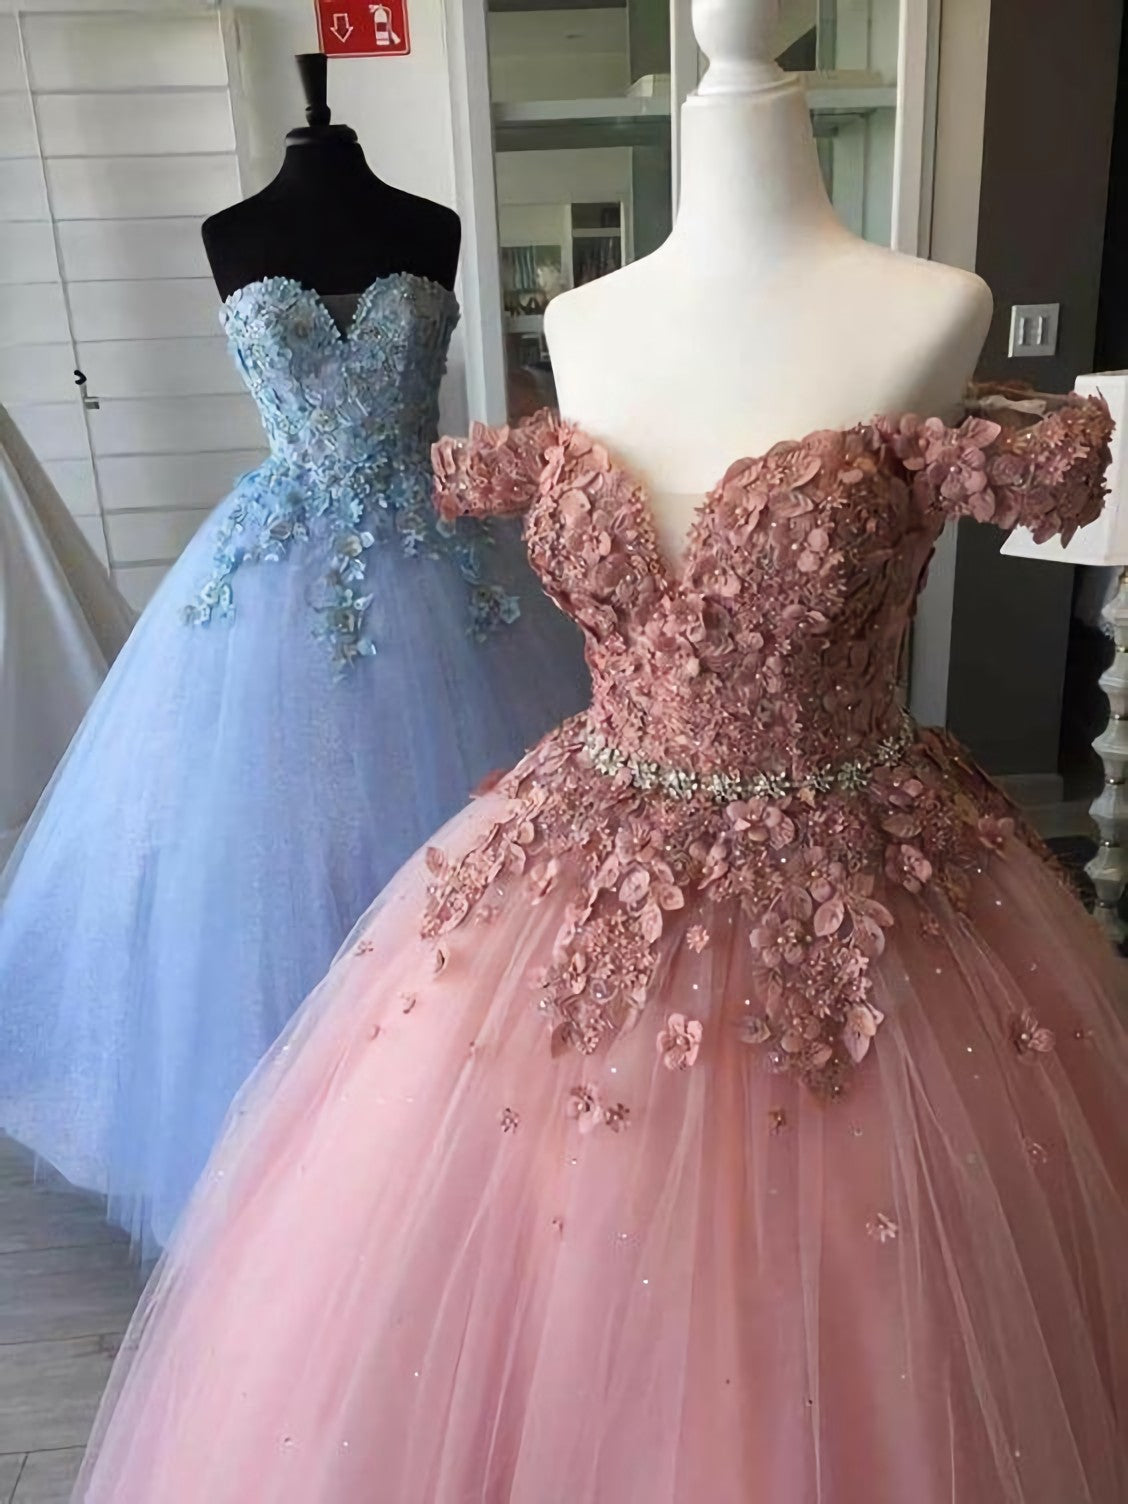 Ball Gown Long Corset Prom Dress, Beading Top Corset Formal Party Dress Outfits, Homecoming Dress Style